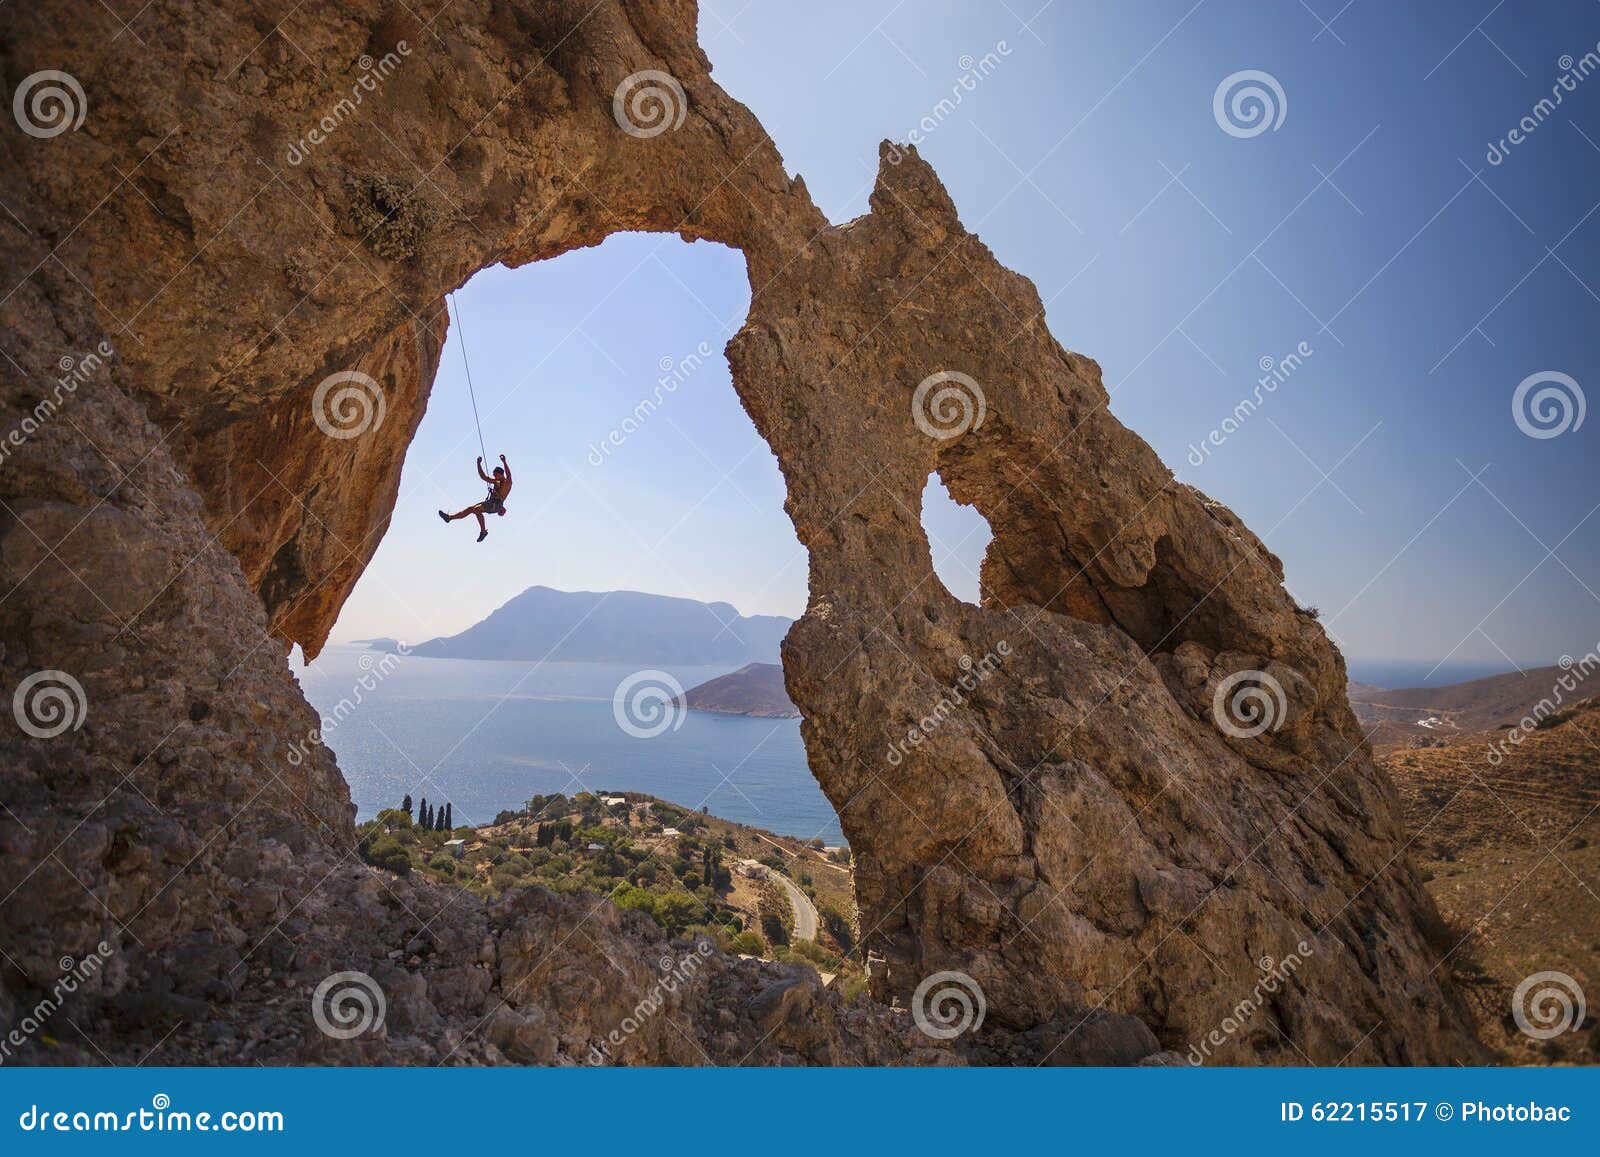 rock climber falling of a cliff while lead climbing.